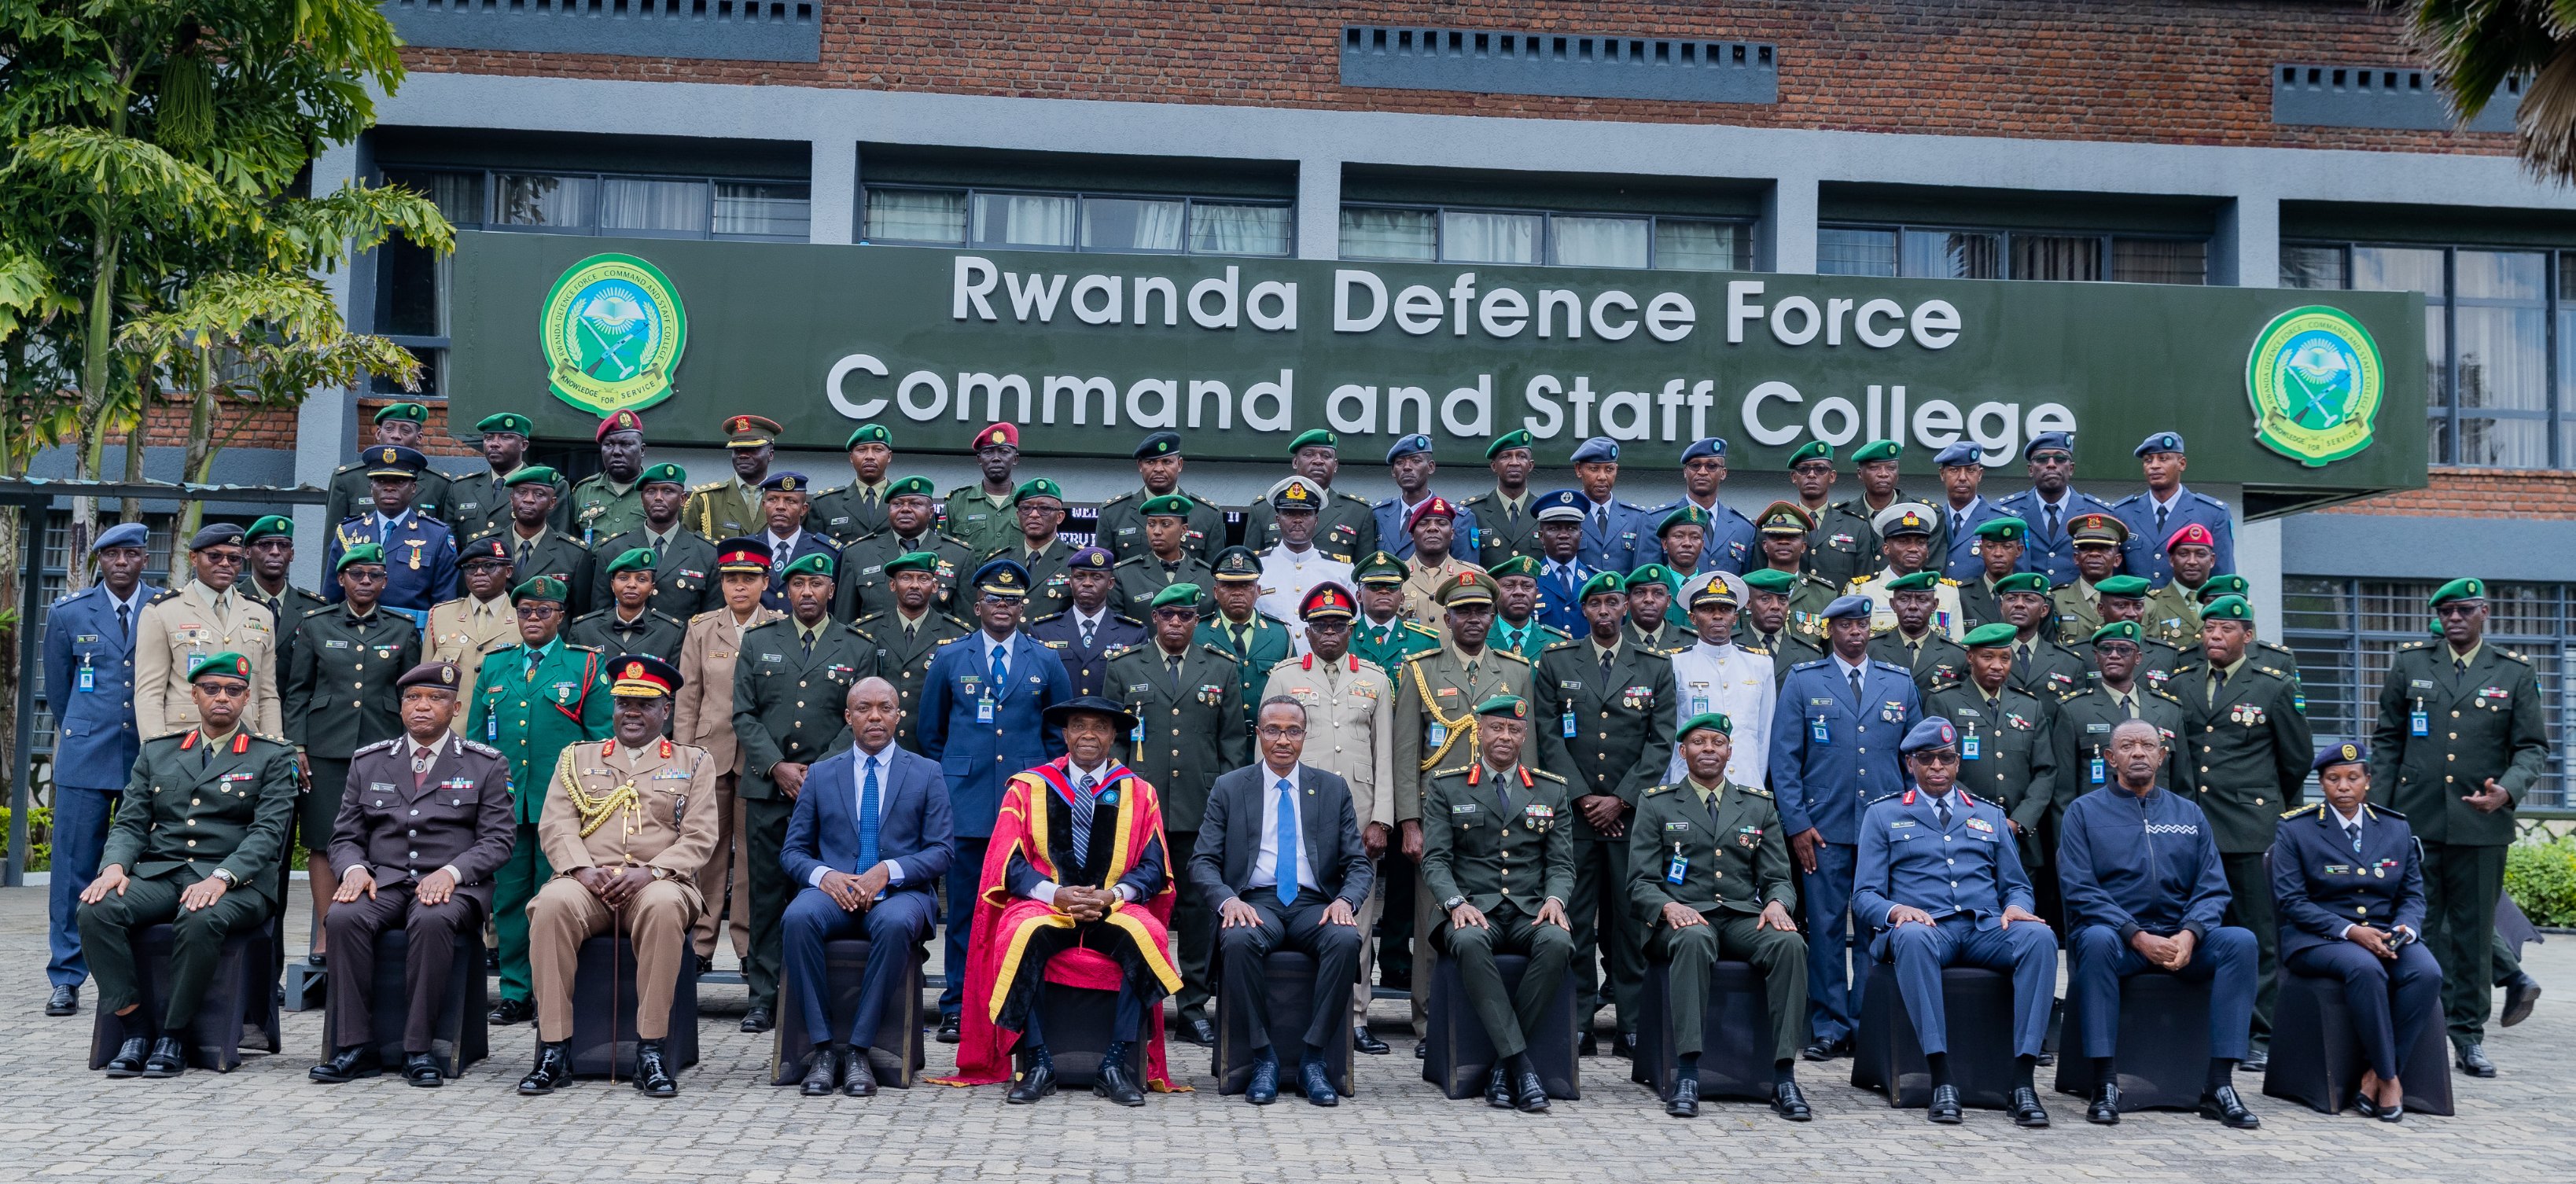 Senior officers from 12 African countries graduate from Rwanda Defence Force Command and Staff College in Musanze on June 11. 